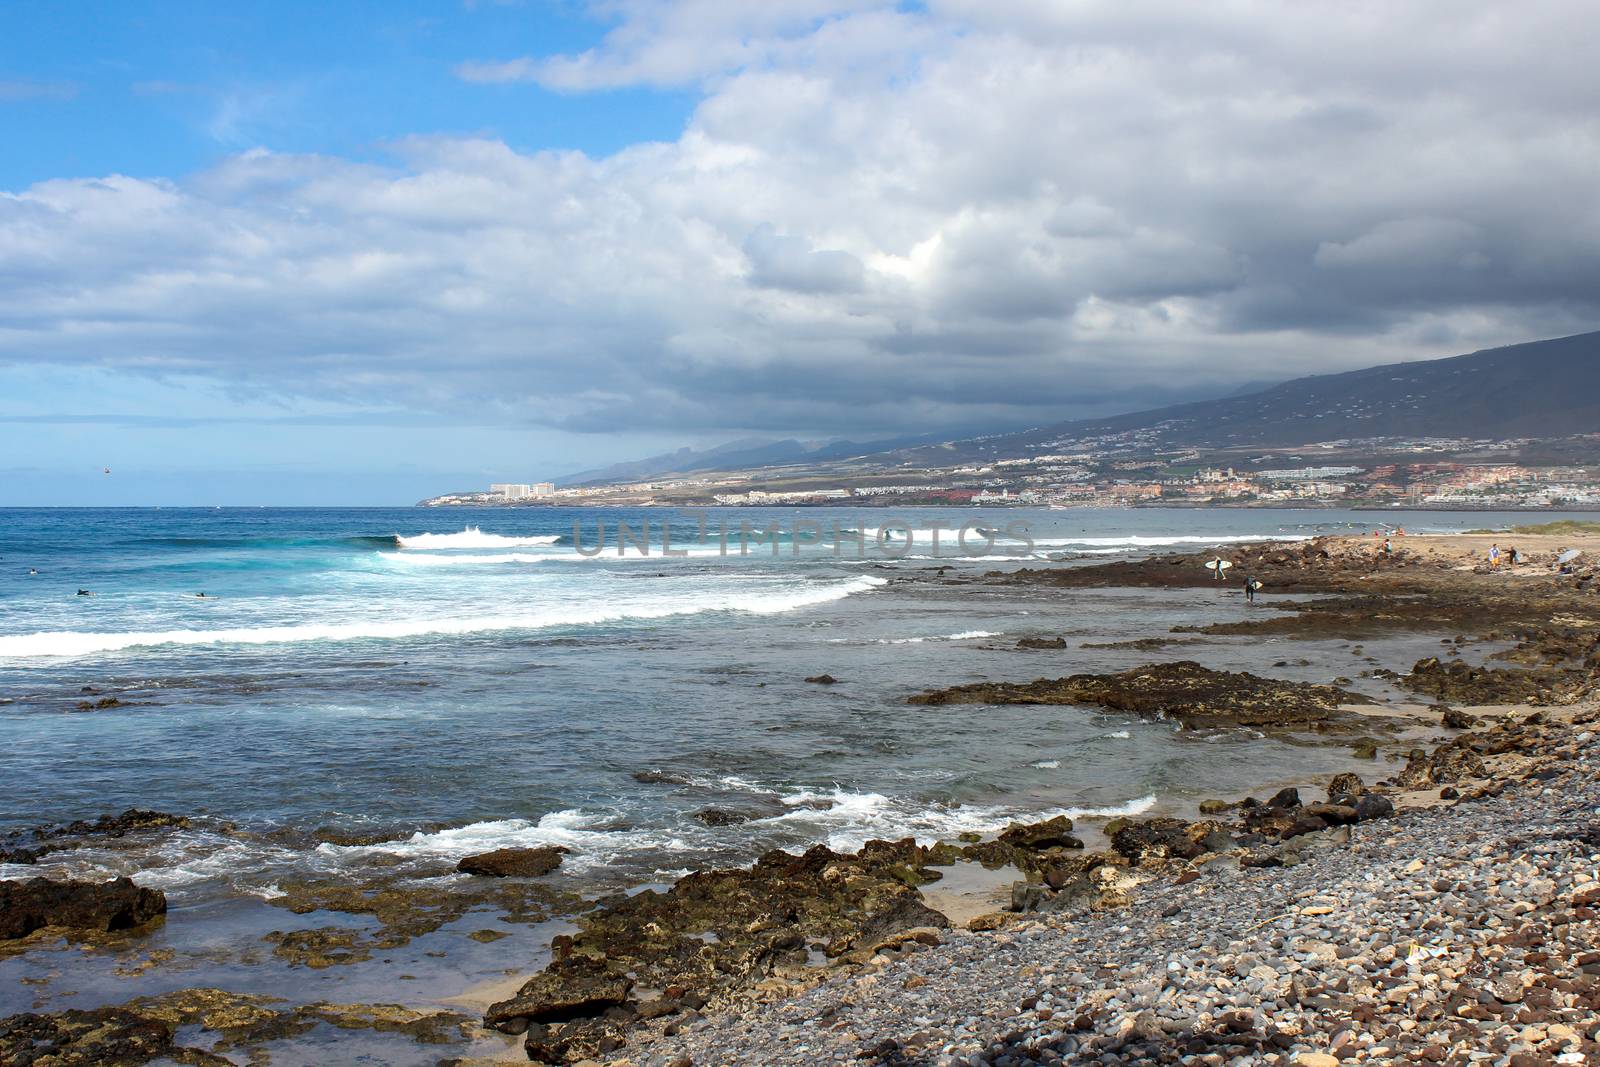 Stony beach at Playa de Las Americas on canary island tenerife with blue water and blue sky